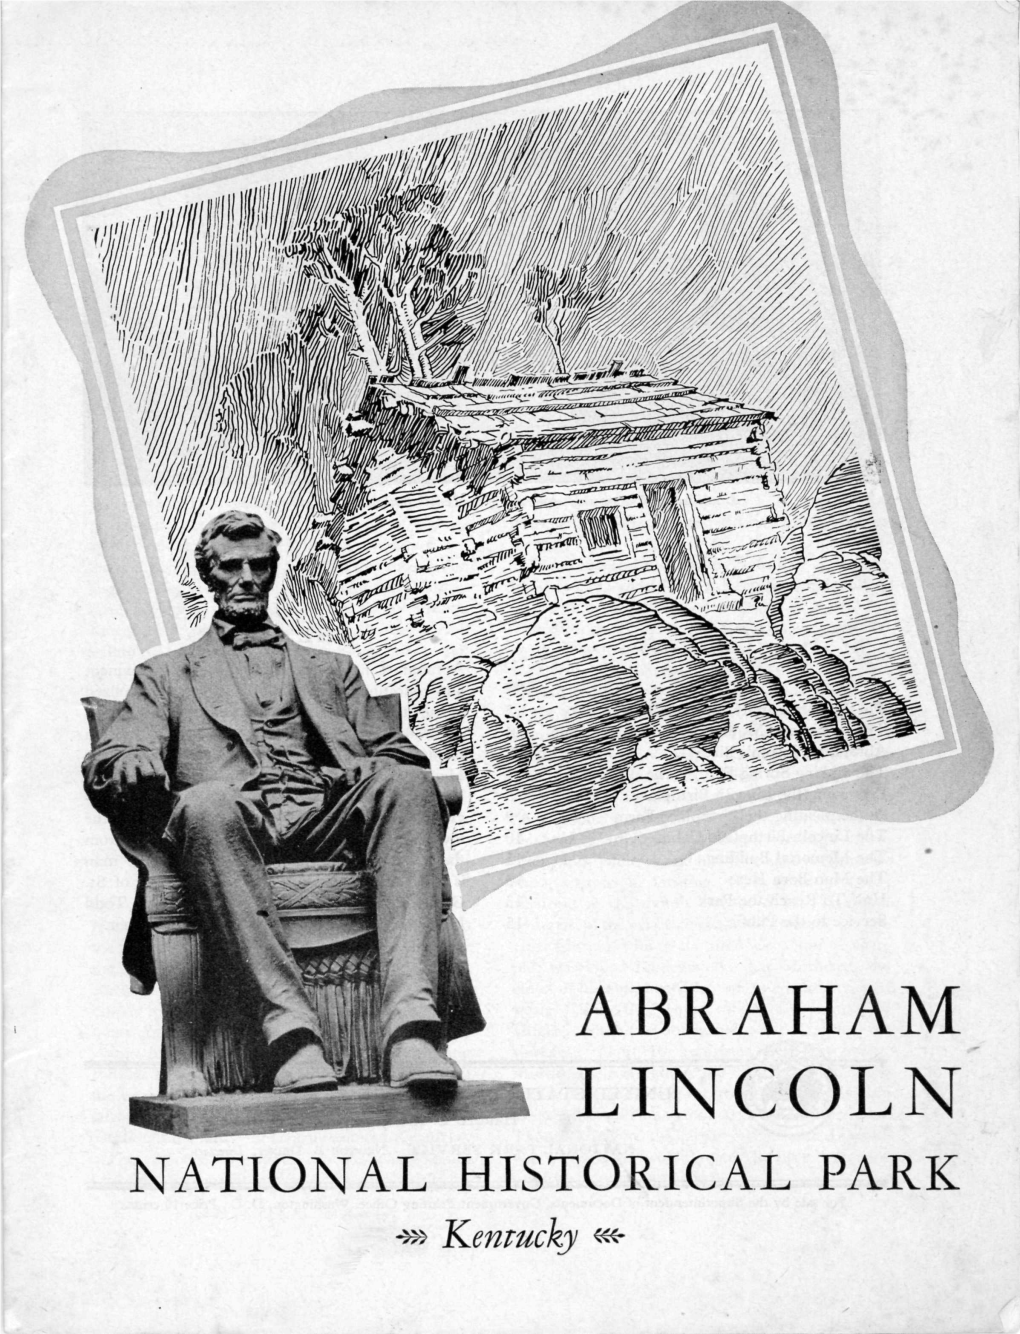 ABRAHAM LINCOLN NATIONAL HISTORICAL PARK -9» Kentucky ««• Artist's Conception Oj the Early Appearance of the Lincoln Birthplace Cabin and Its Setting